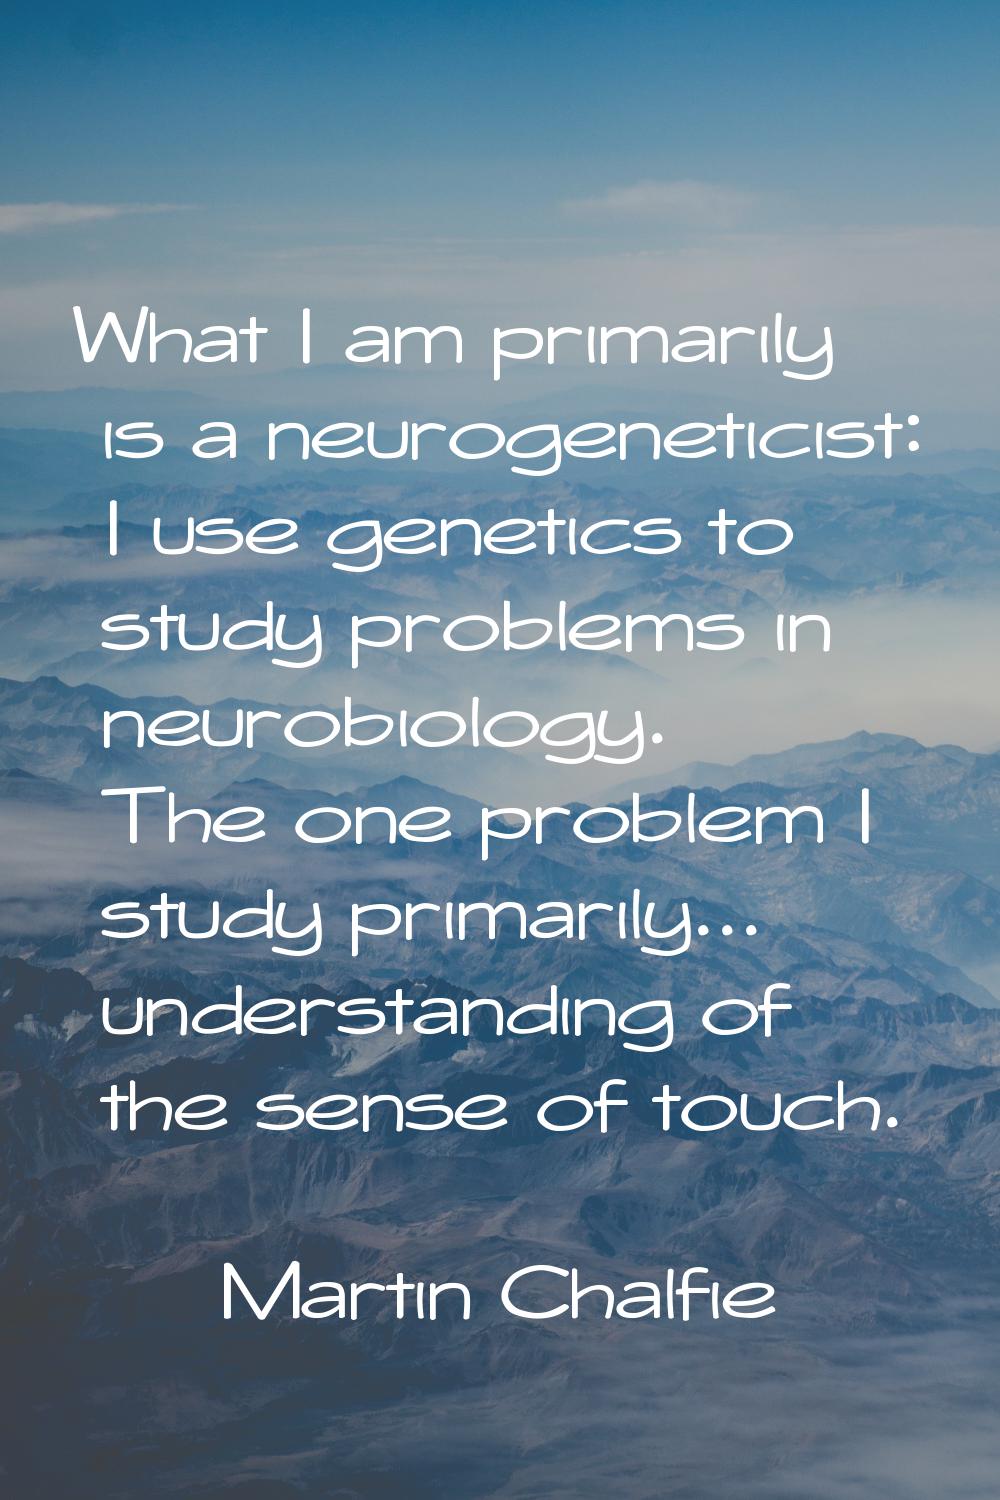 What I am primarily is a neurogeneticist: I use genetics to study problems in neurobiology. The one